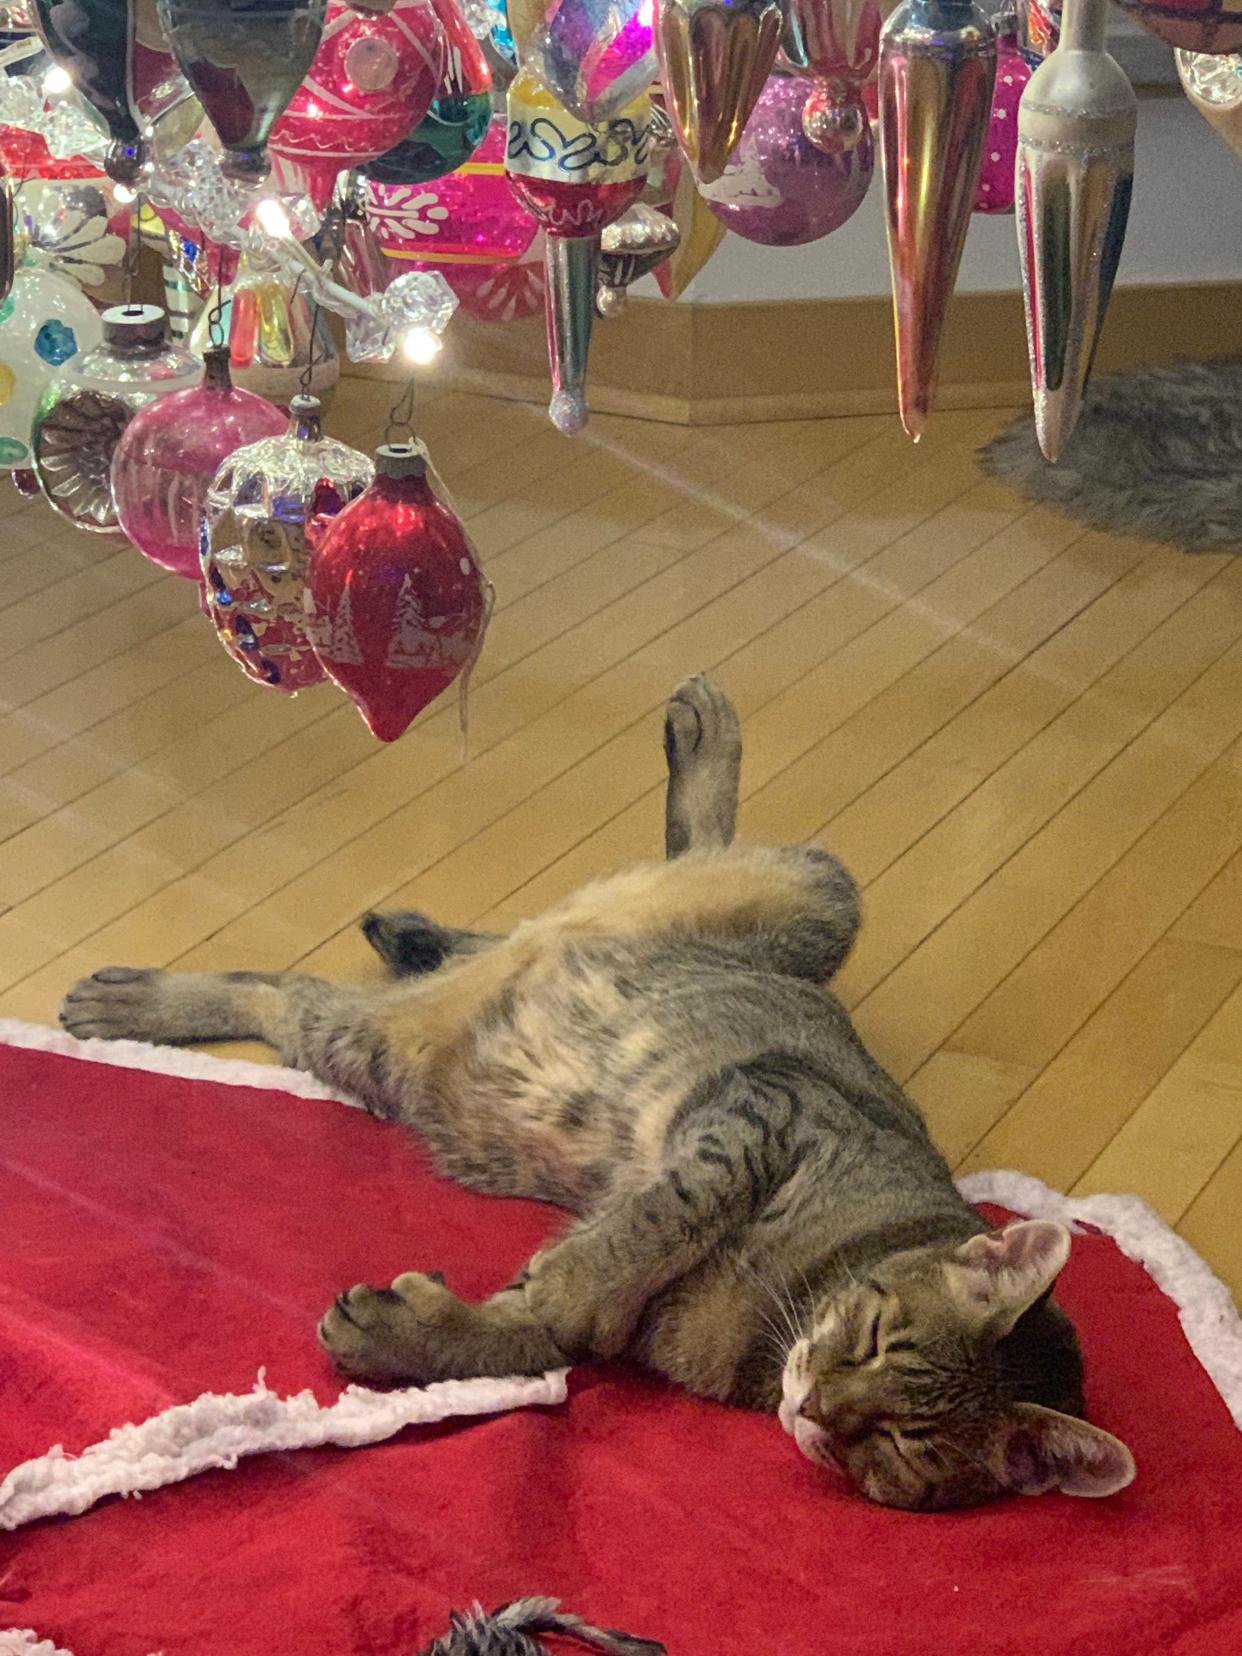 Kevin Milaeger's cat, Ajax, relaxes under a Christmas tree in his Caledonia home. Milaeger has a collection of thousands of vintage ornaments that he decorates with every year, but he said Ajax leaves them alone.